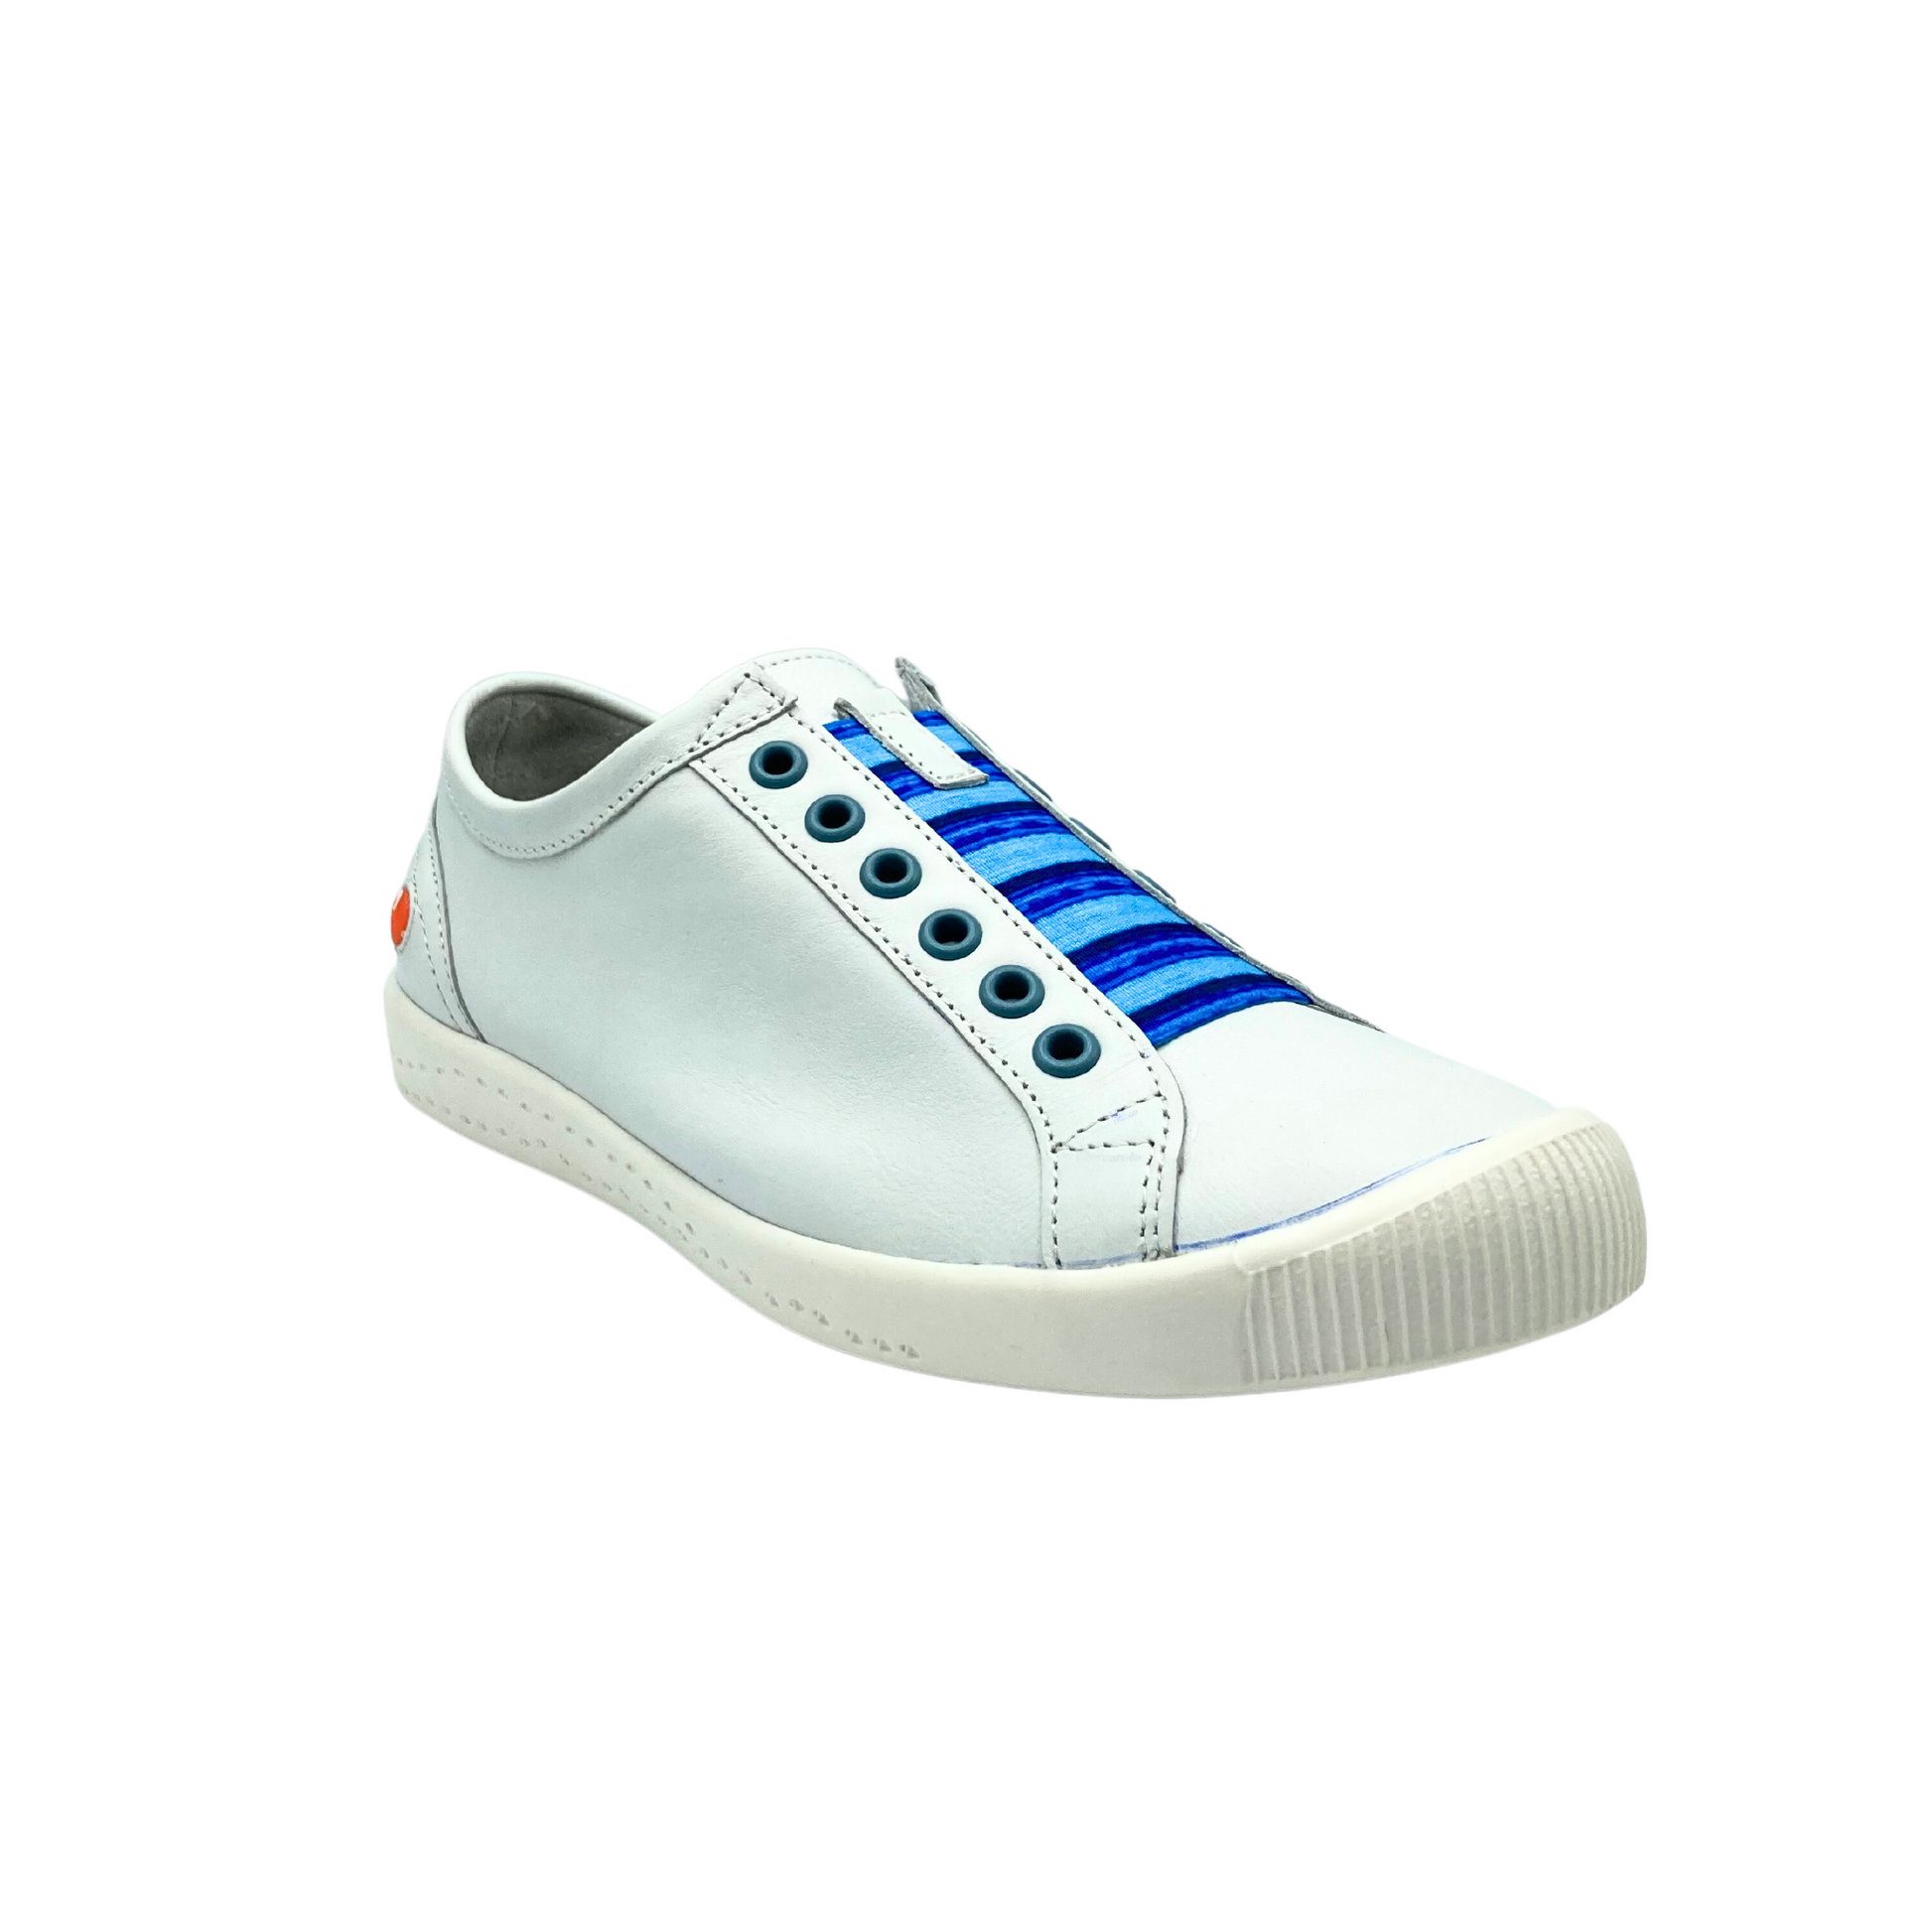 Angled front view of a white leather sneaker.  Slip on stle with elastic laces across the top.